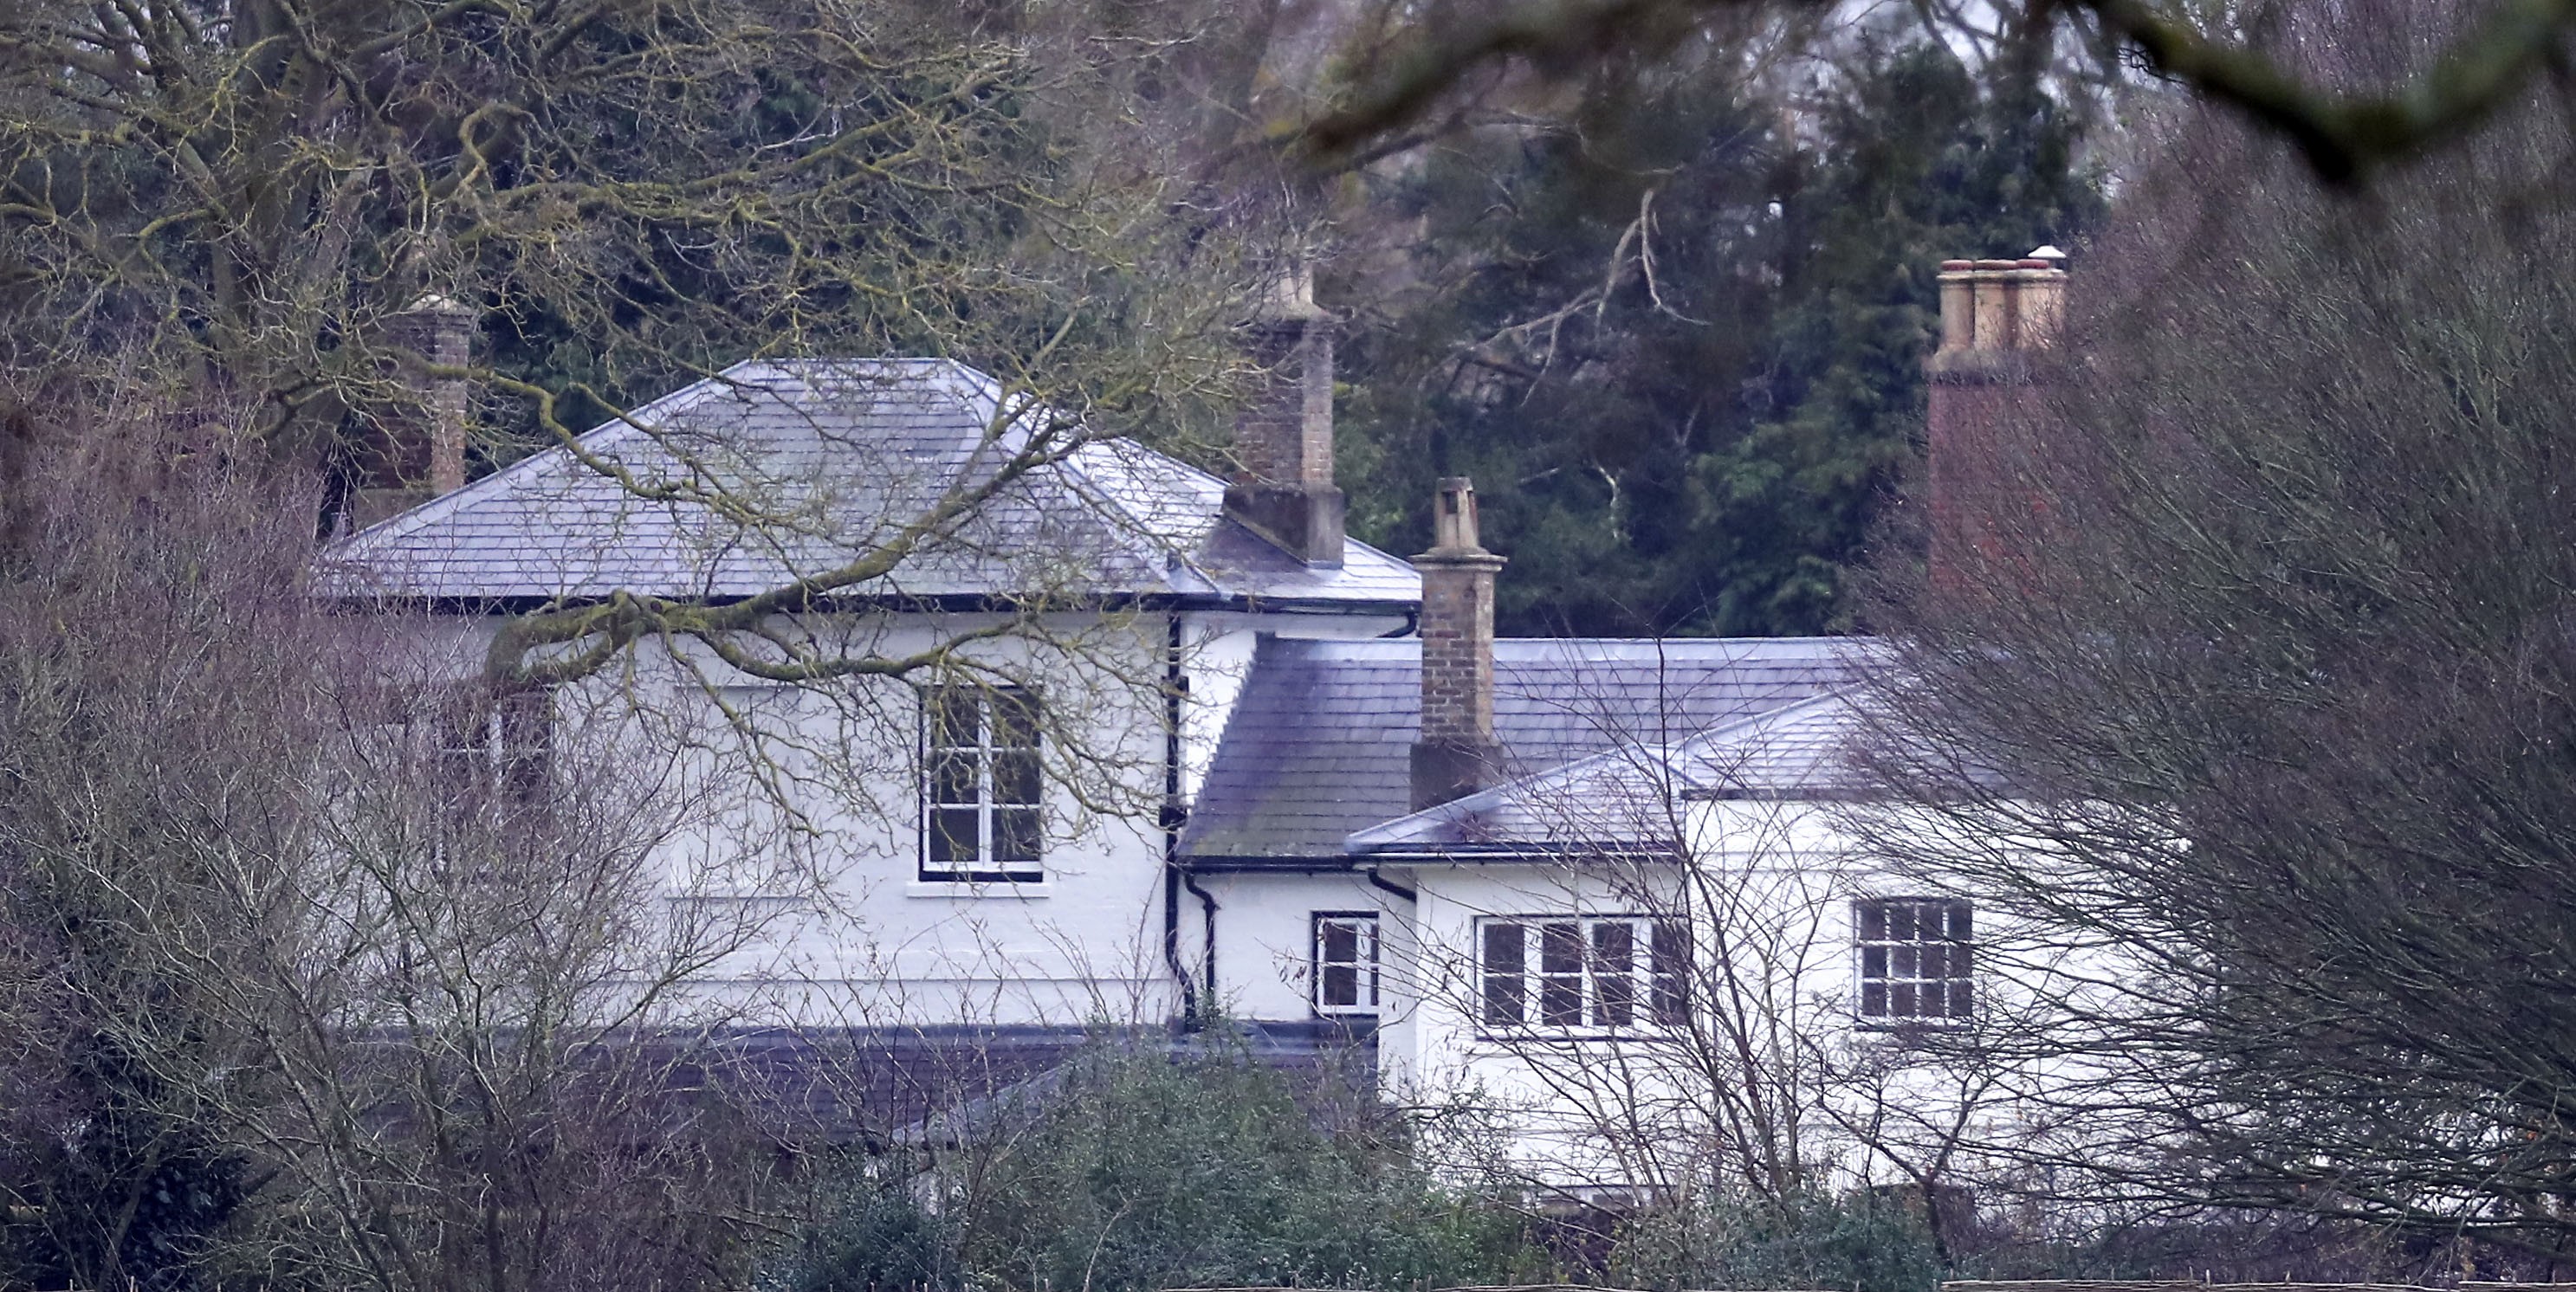 General view of Frogmore Cottage in Home Park Estate, Windsor.  Palestinian Authority photo.  Photo date: Tuesday, January 14, 2020. It is the home of the Duke and Duchess of Sussex.  Must read image credit: Steve Parsons/PA Wire (Photo by Steve Parsons/PA Images via G (Photo: PA Images via Getty Images)